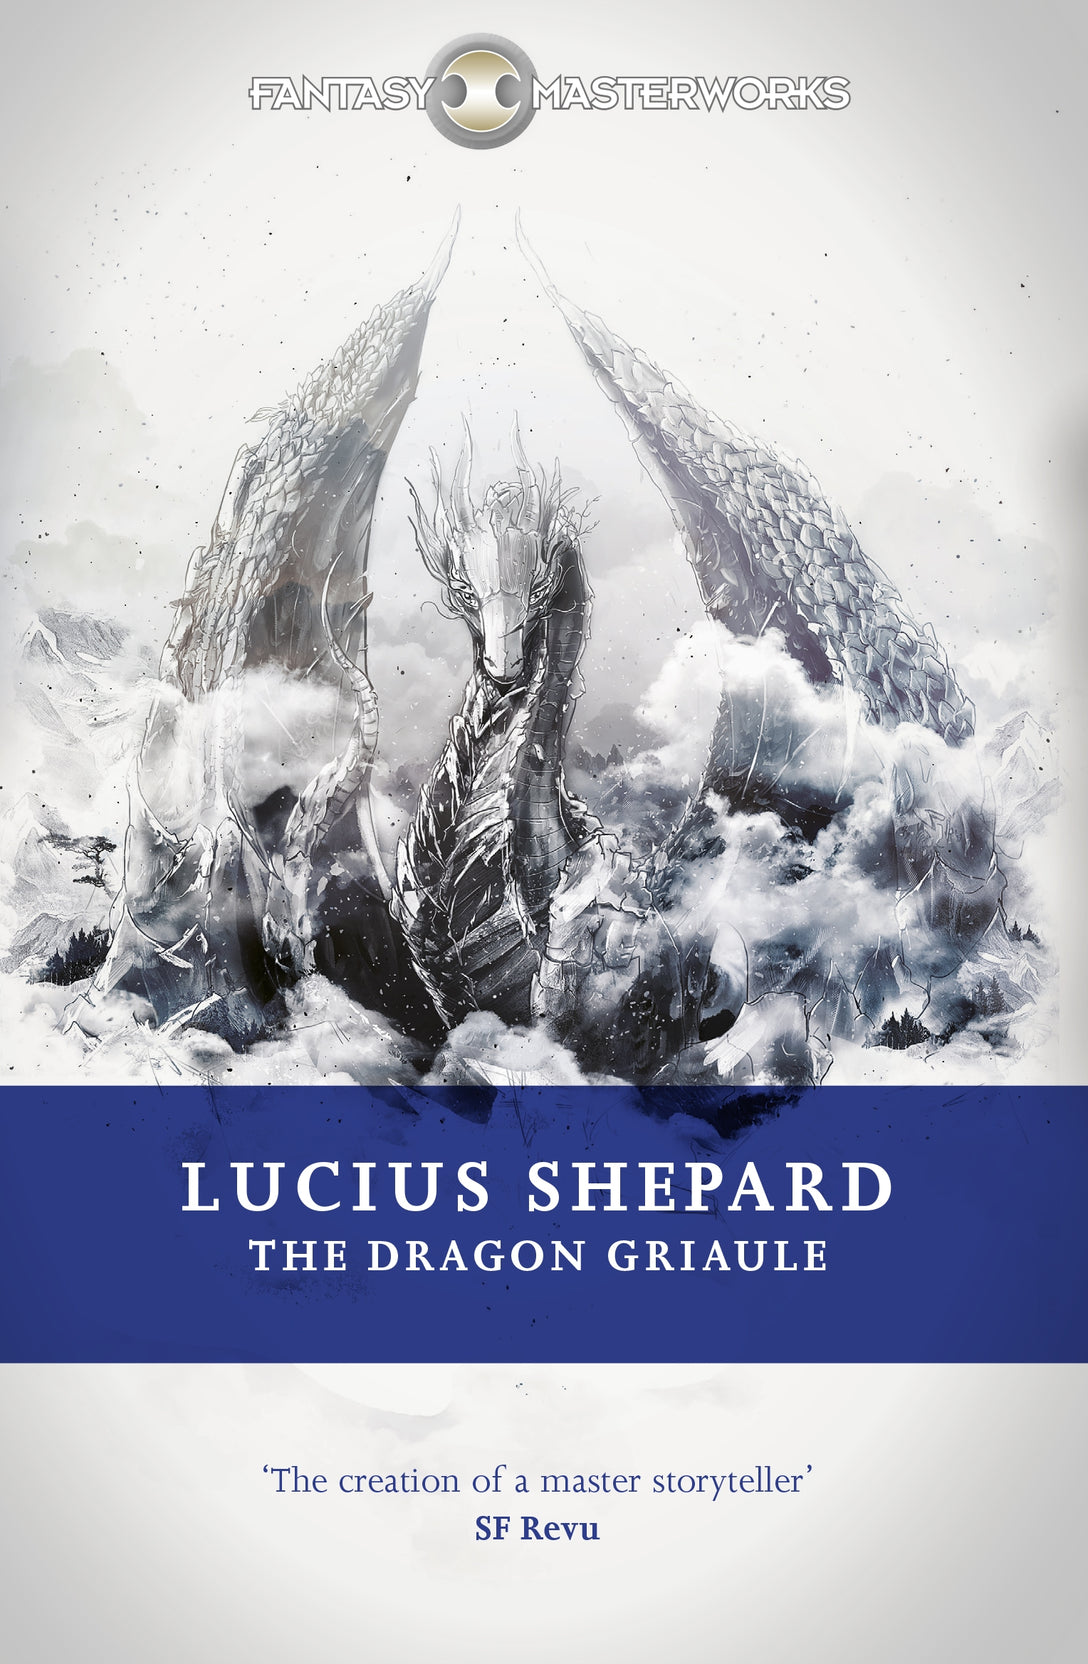 The Dragon Griaule by Lucius Shepard